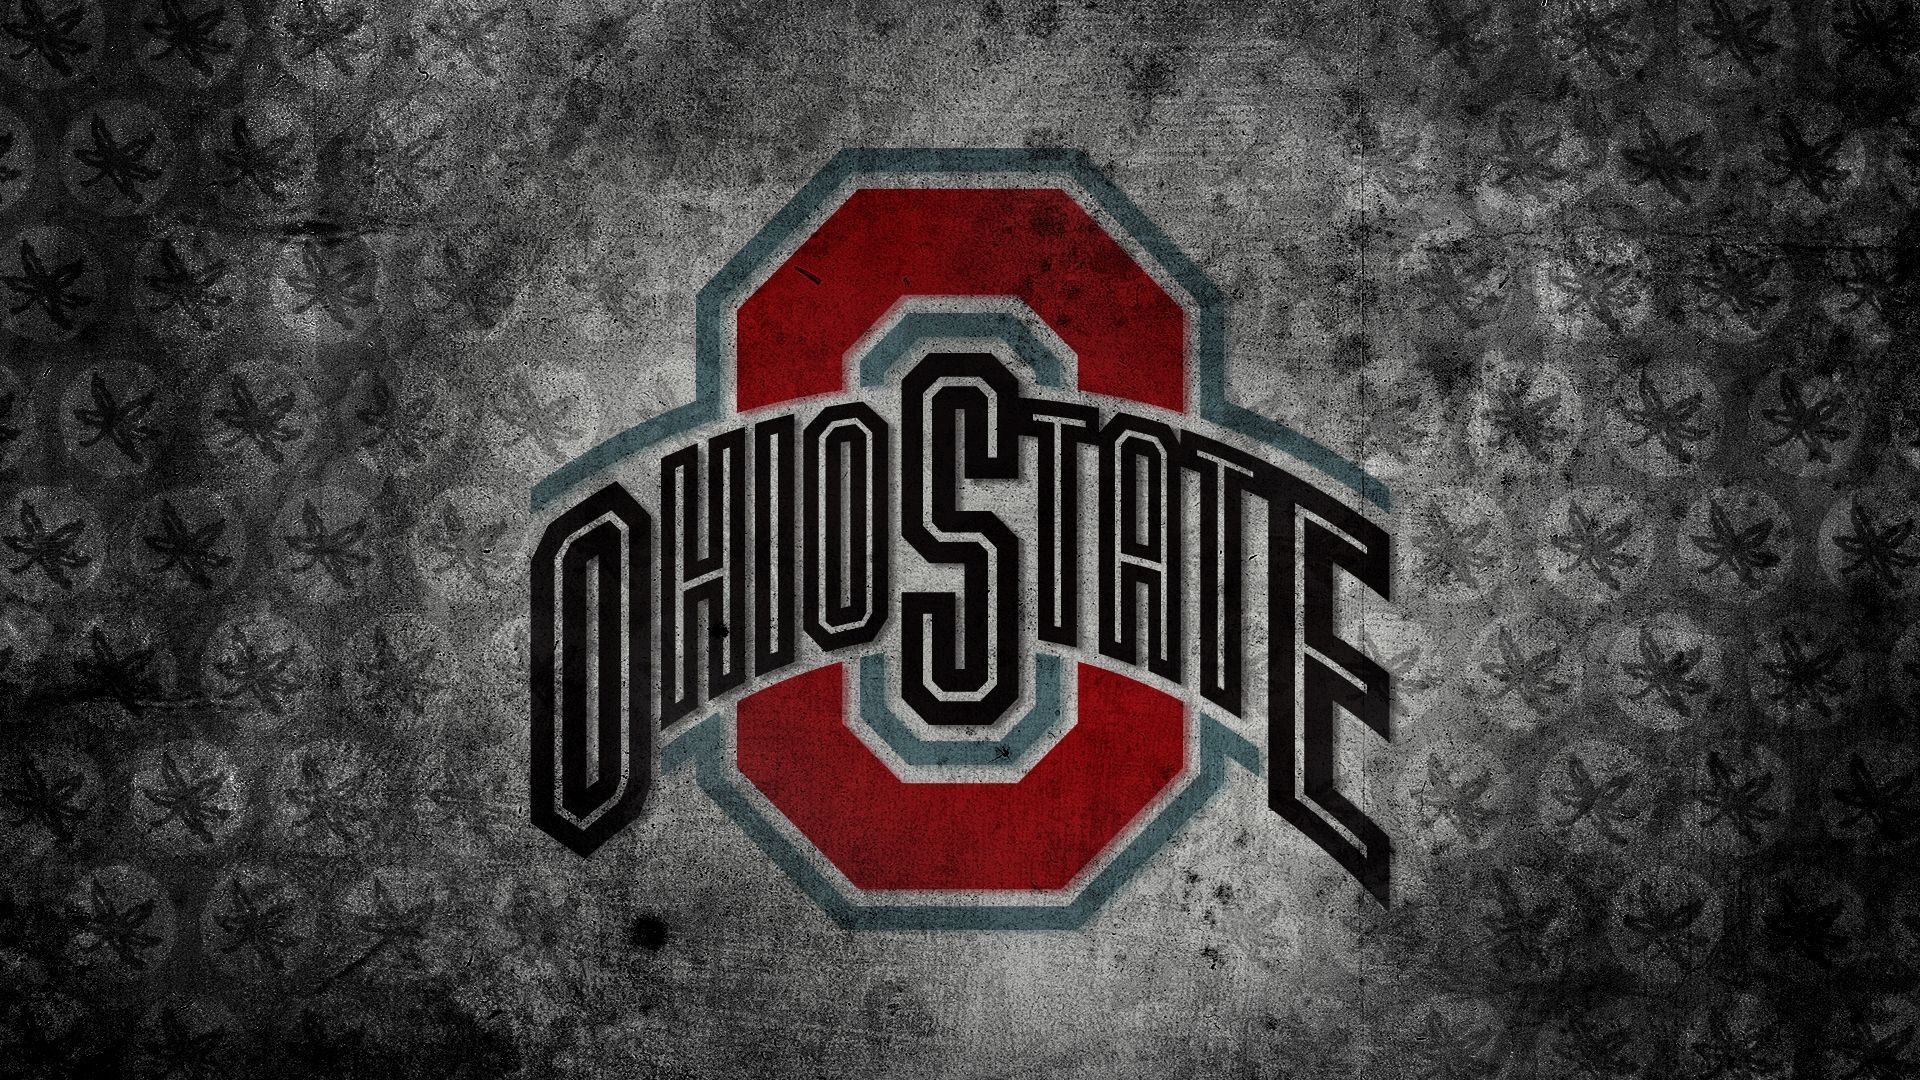 Most Popular Ohio State Desktop Background FULL HD 1080p For PC D. Ohio state wallpaper, Ohio state buckeyes wallpaper, Ohio state buckeyes football wallpaper